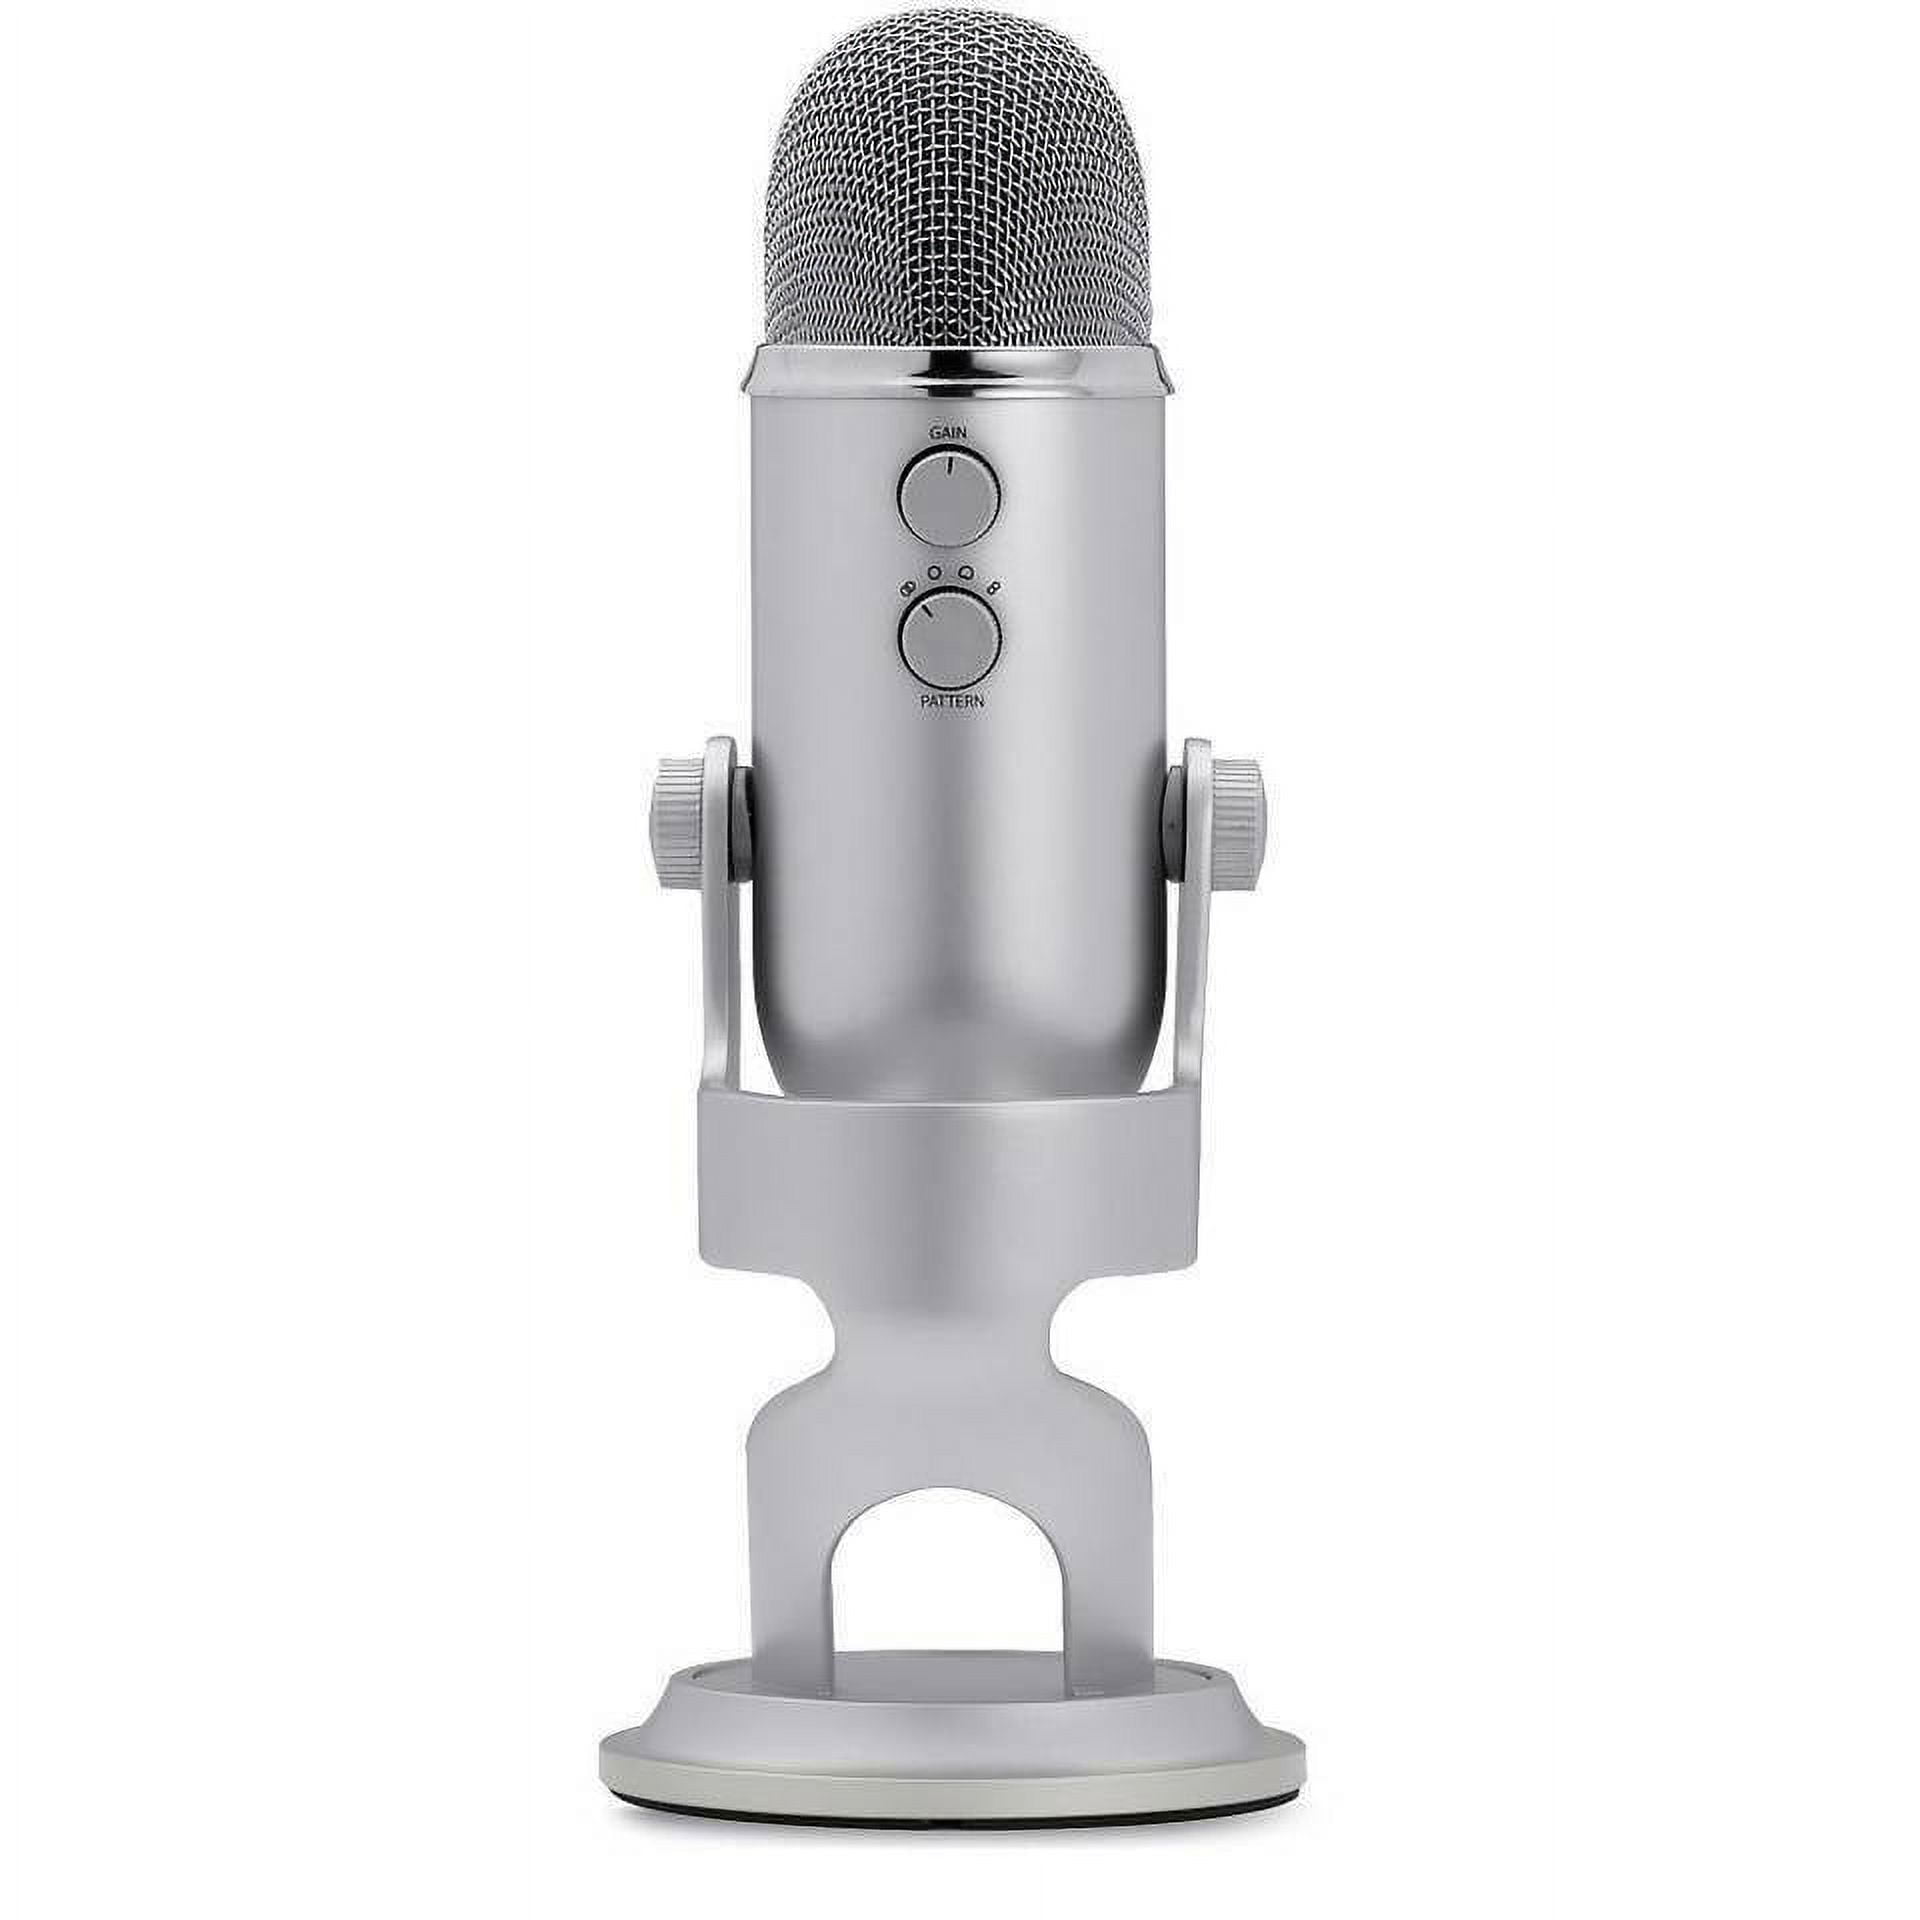 Cyber Monday Blue Yeti deals 2021: Nab our favorite USB Microphone